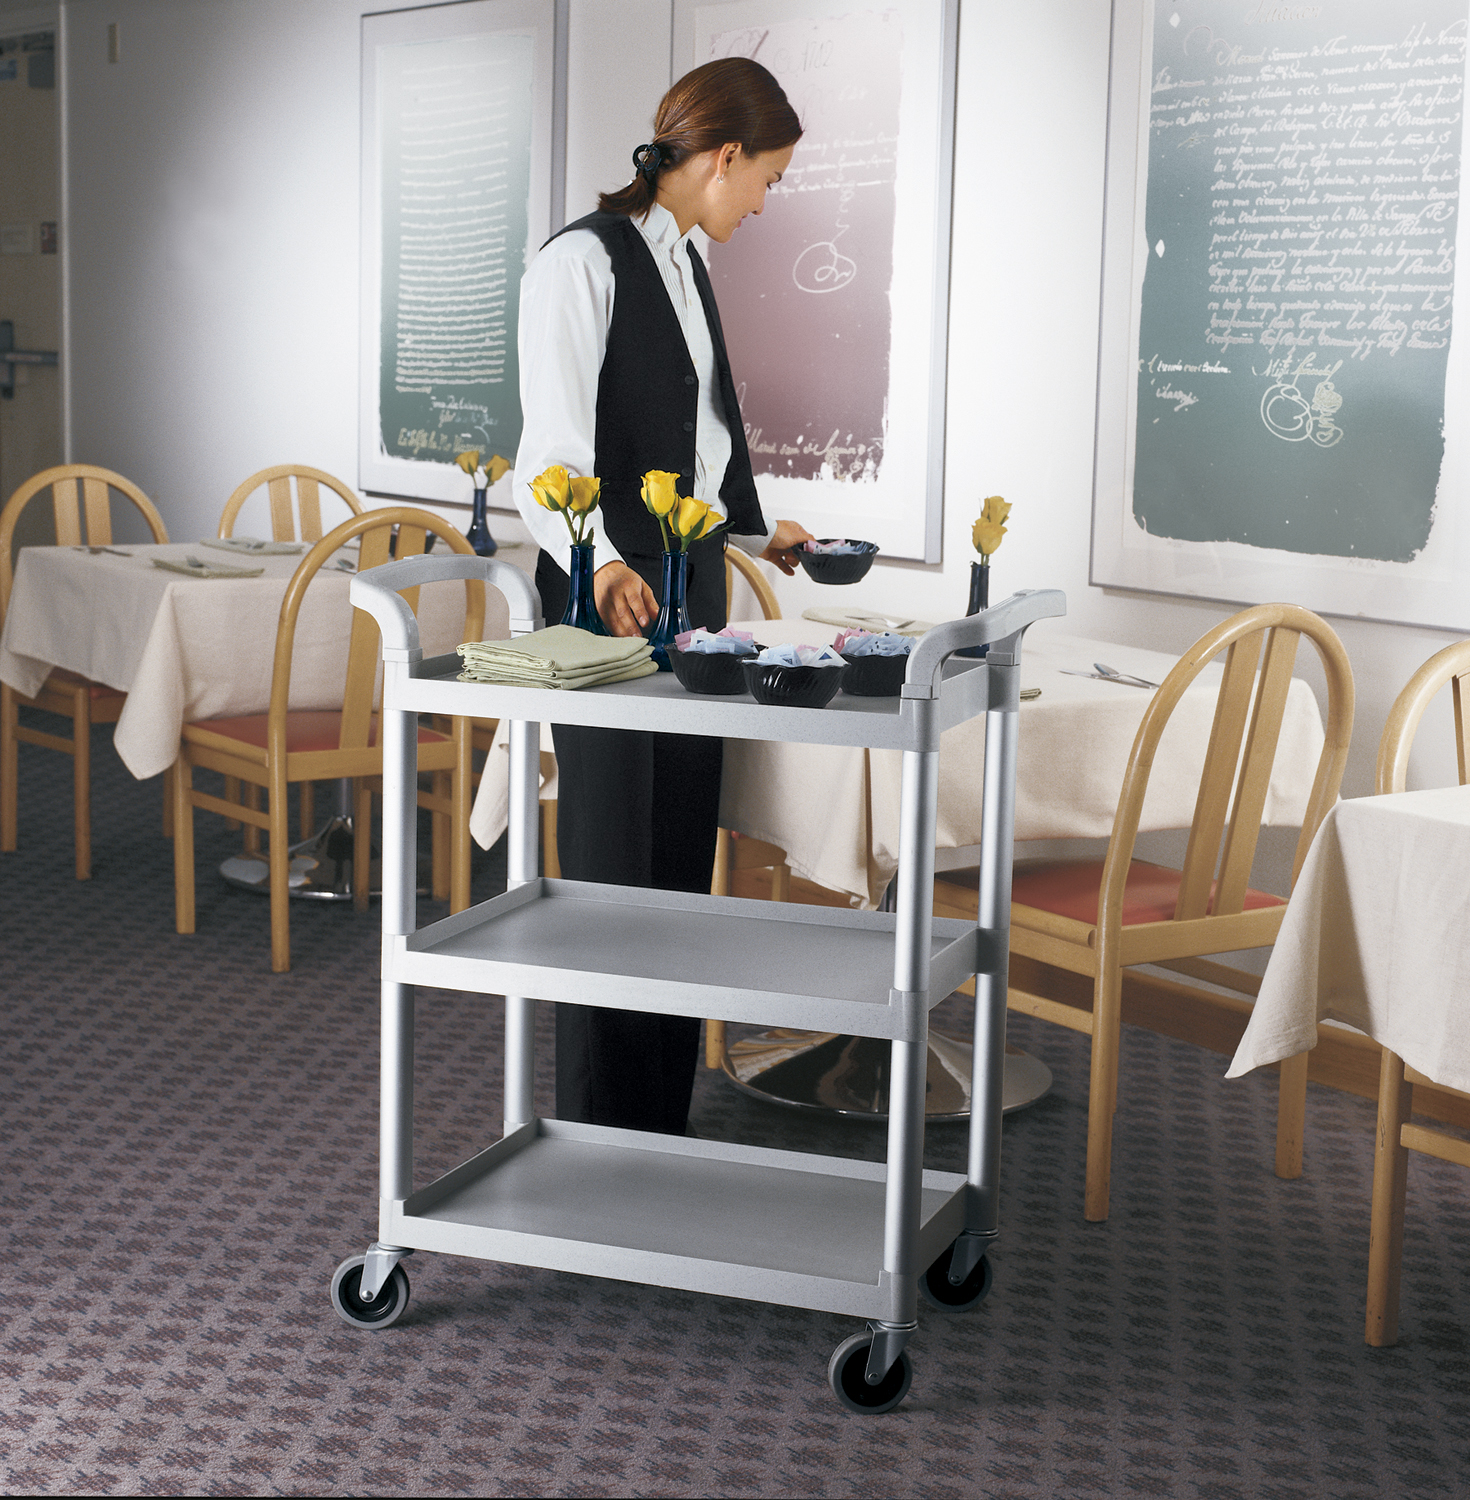 Gray KD Cart being used to bus cafe tables by a server